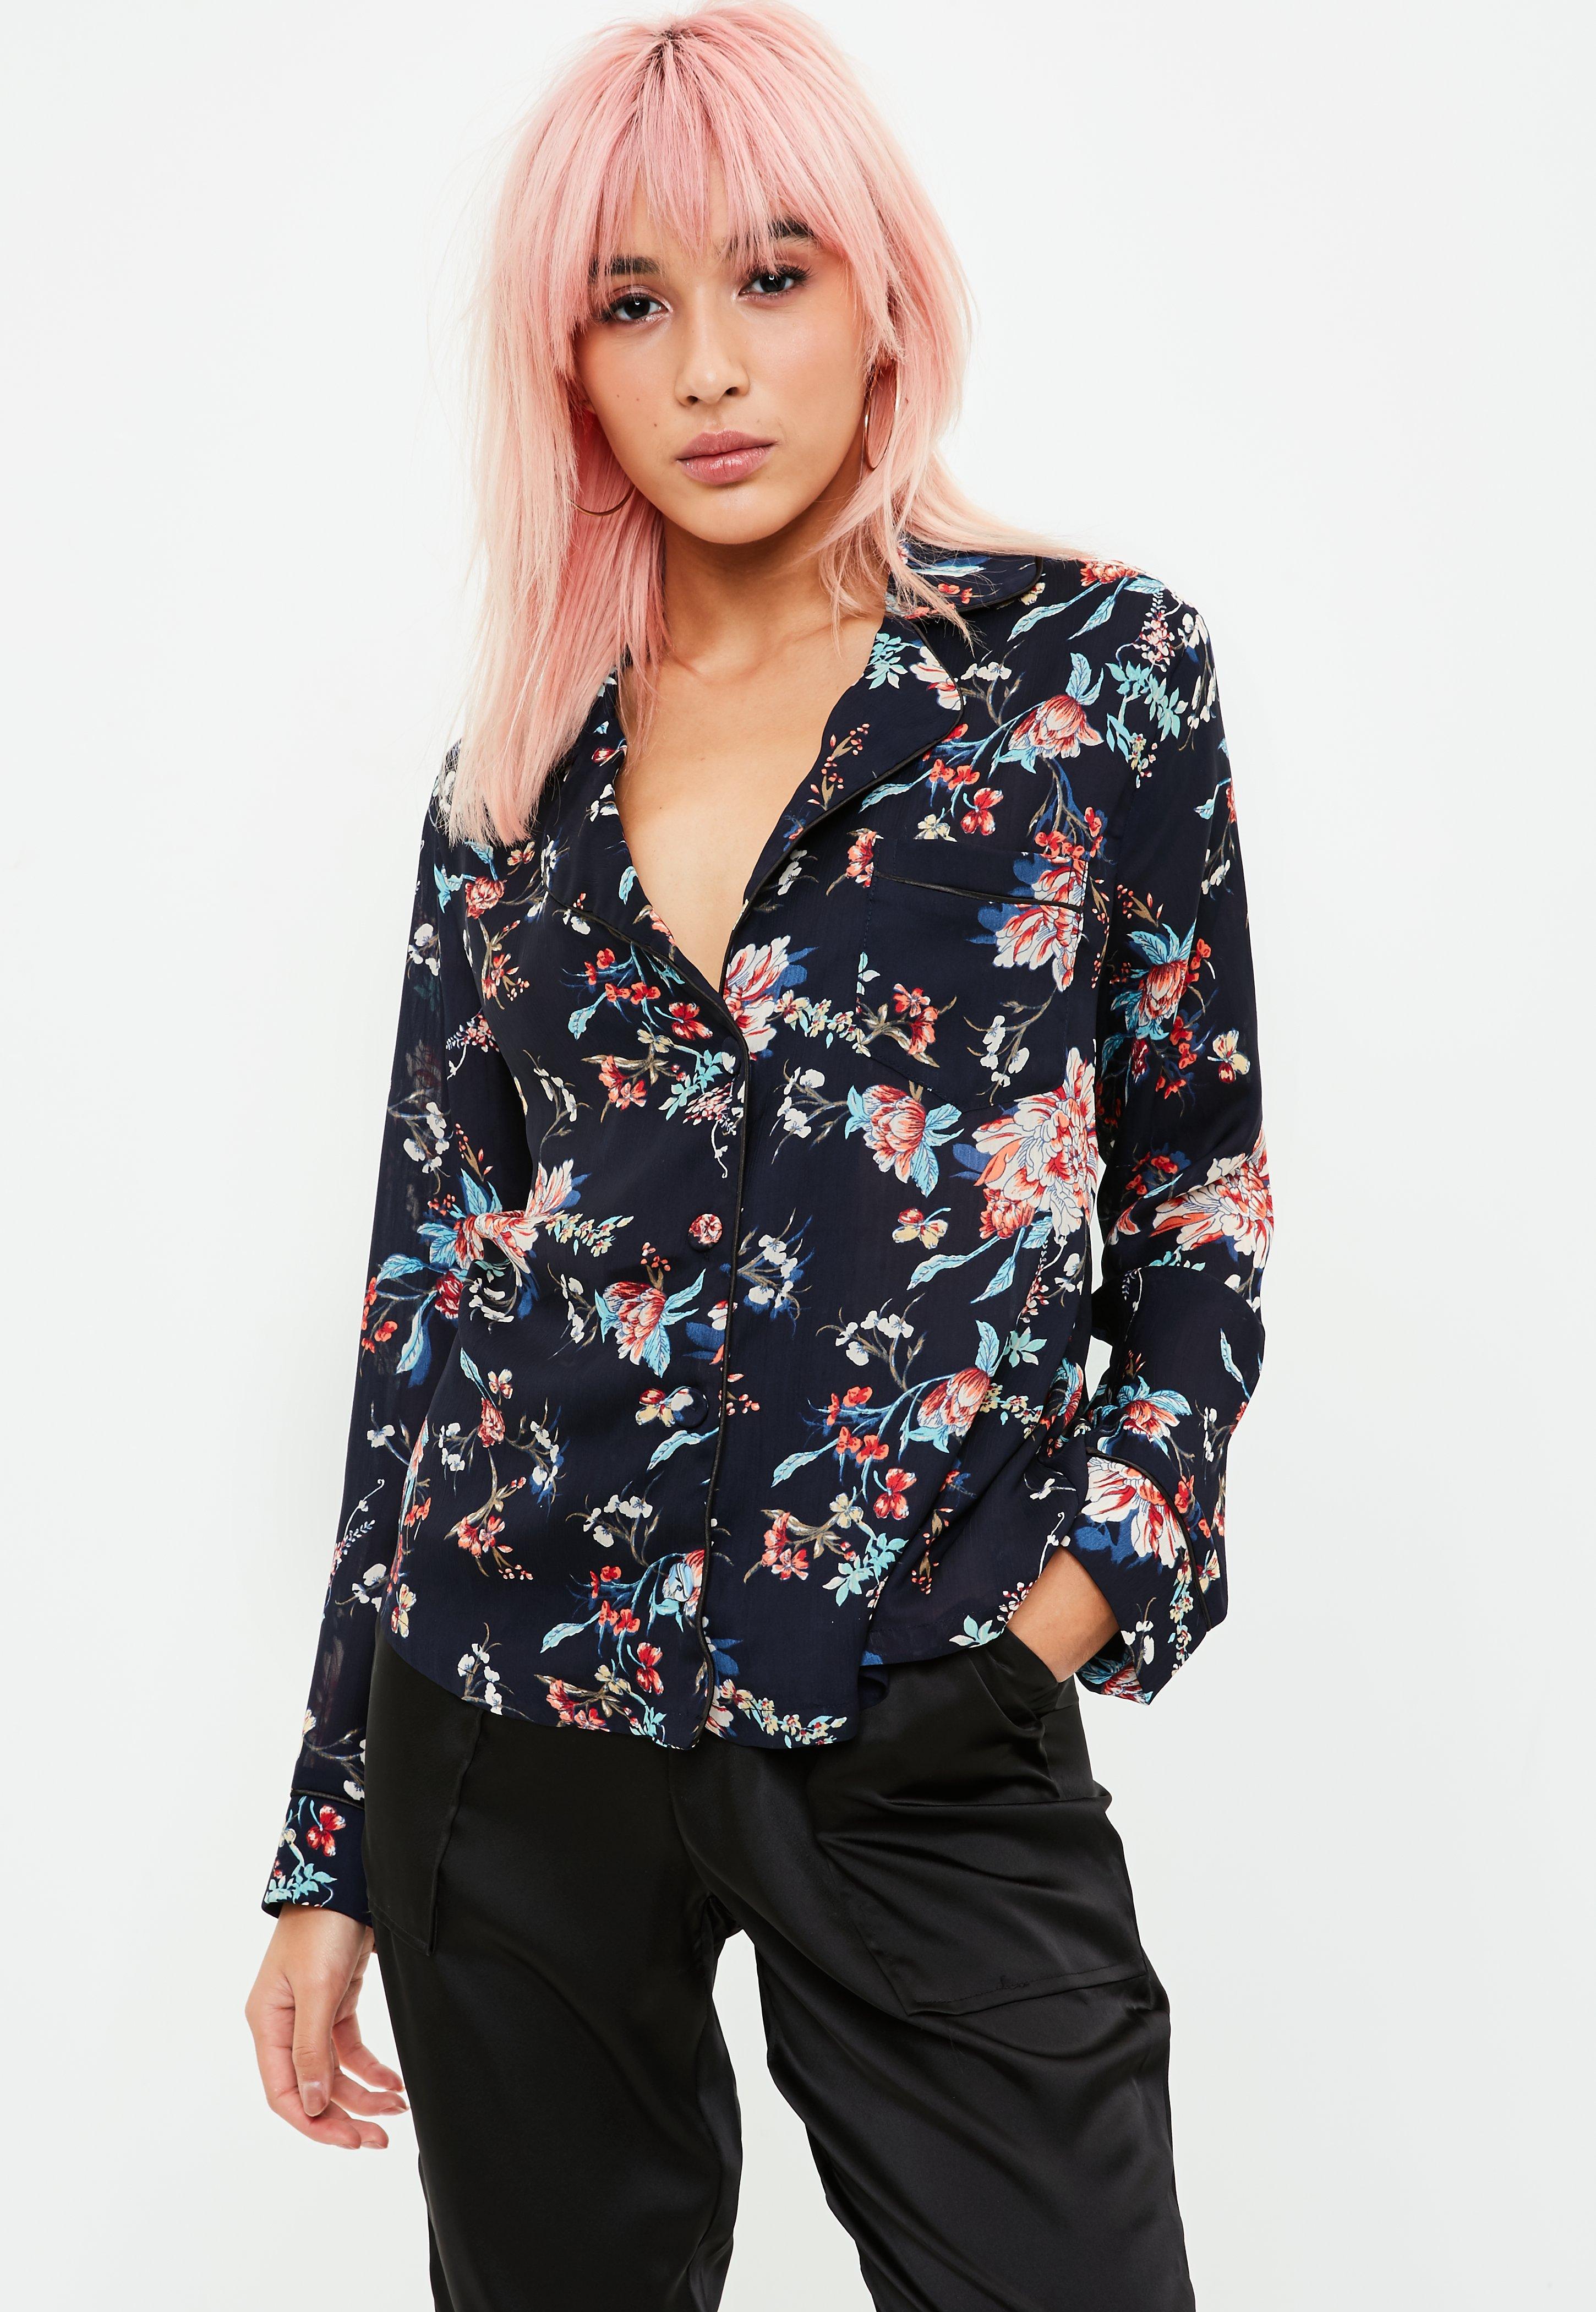 Lyst - Missguided Navy Floral Print Pajamas Shirt in Blue